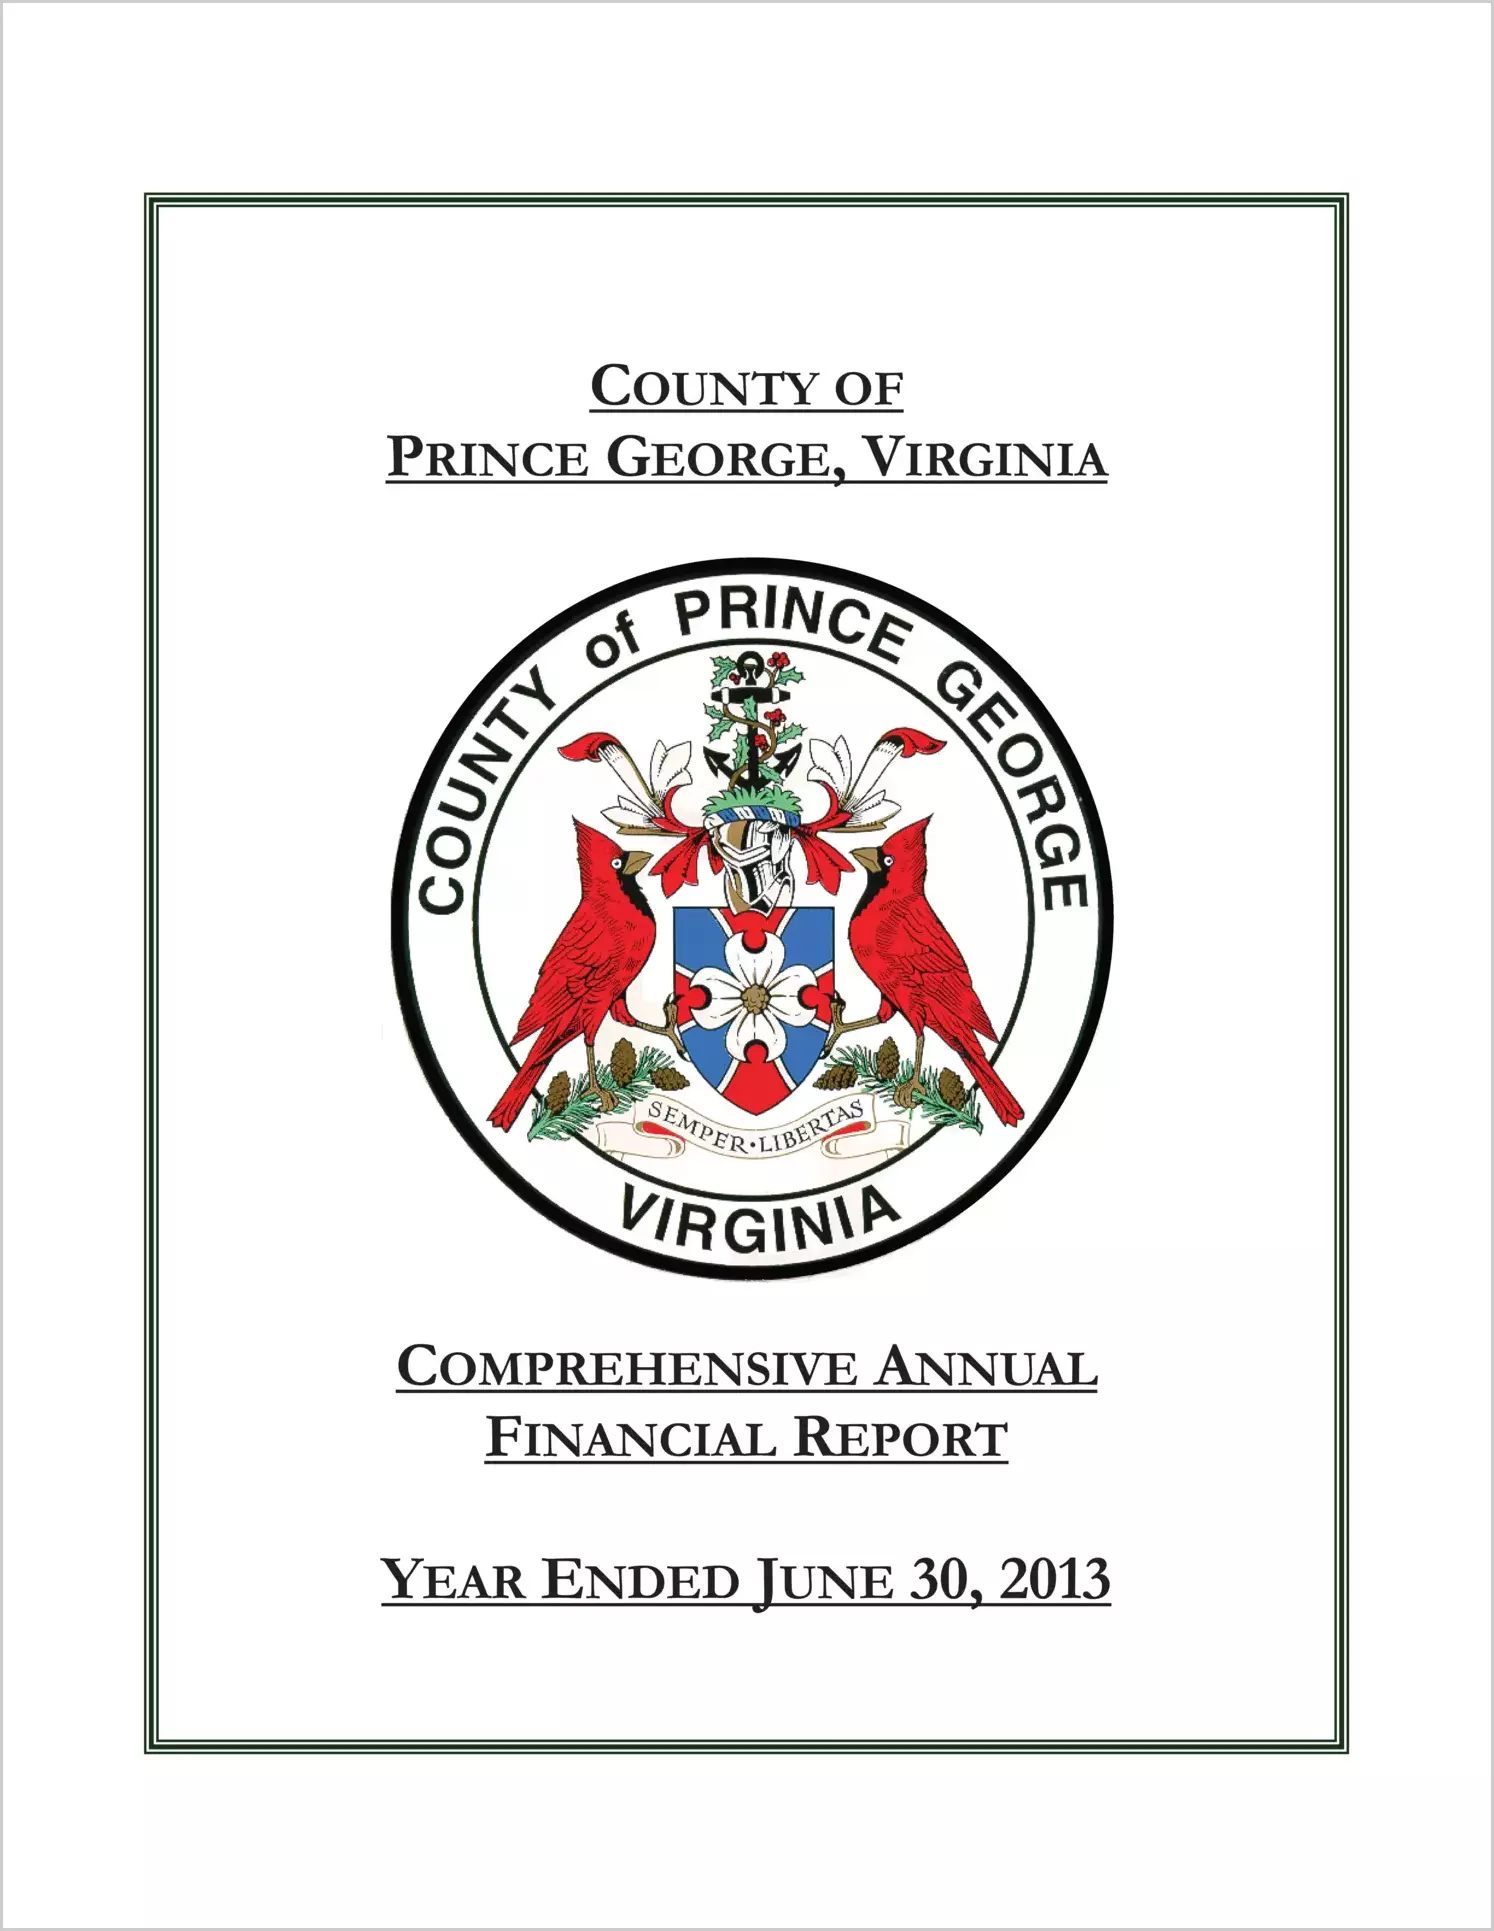 2013 Annual Financial Report for County of Prince George